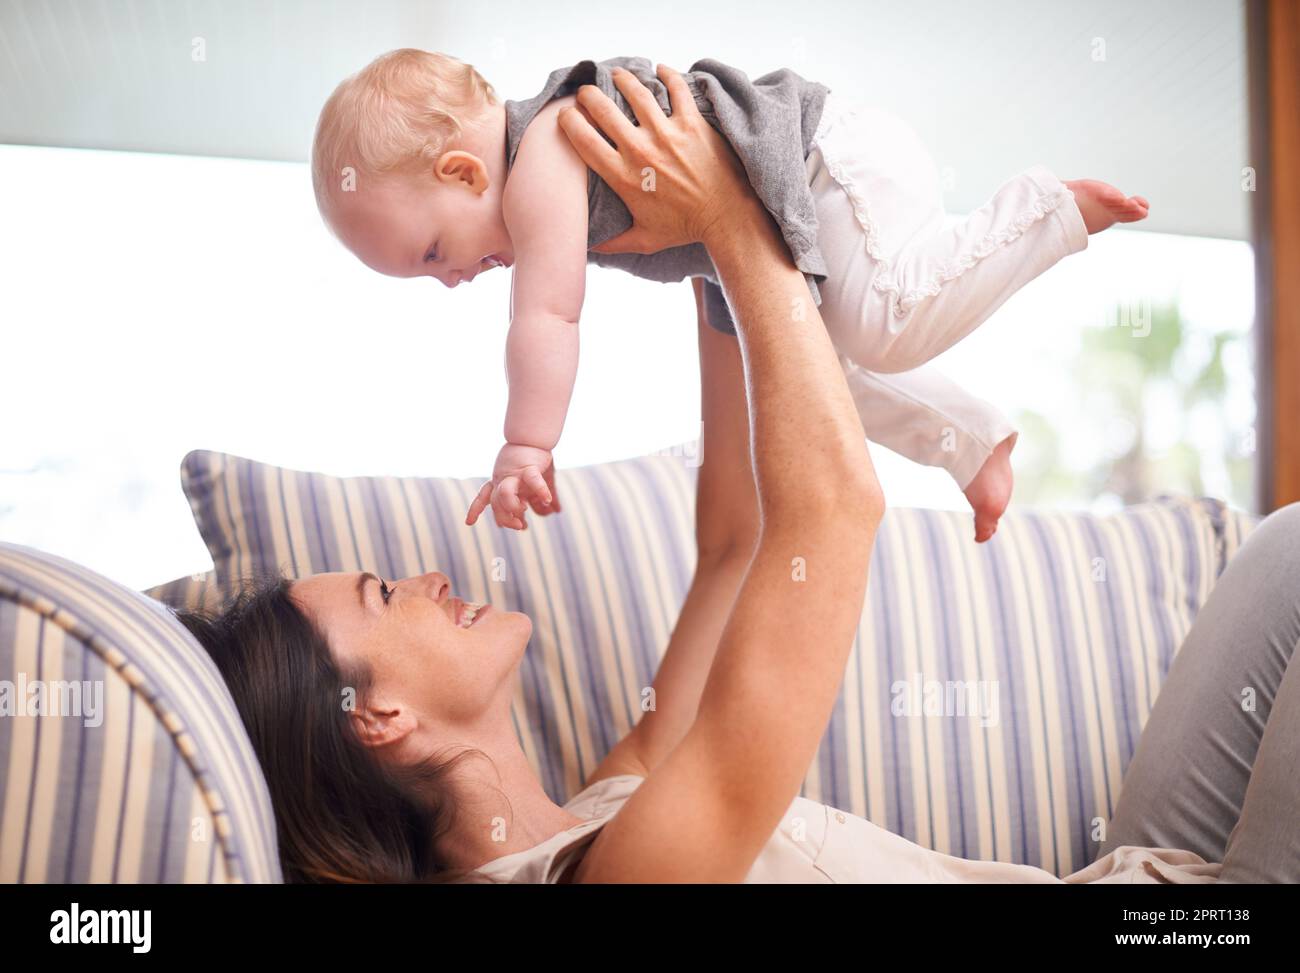 Raising him right. an attractive young woman playing with her baby girl on the sofa. Stock Photo